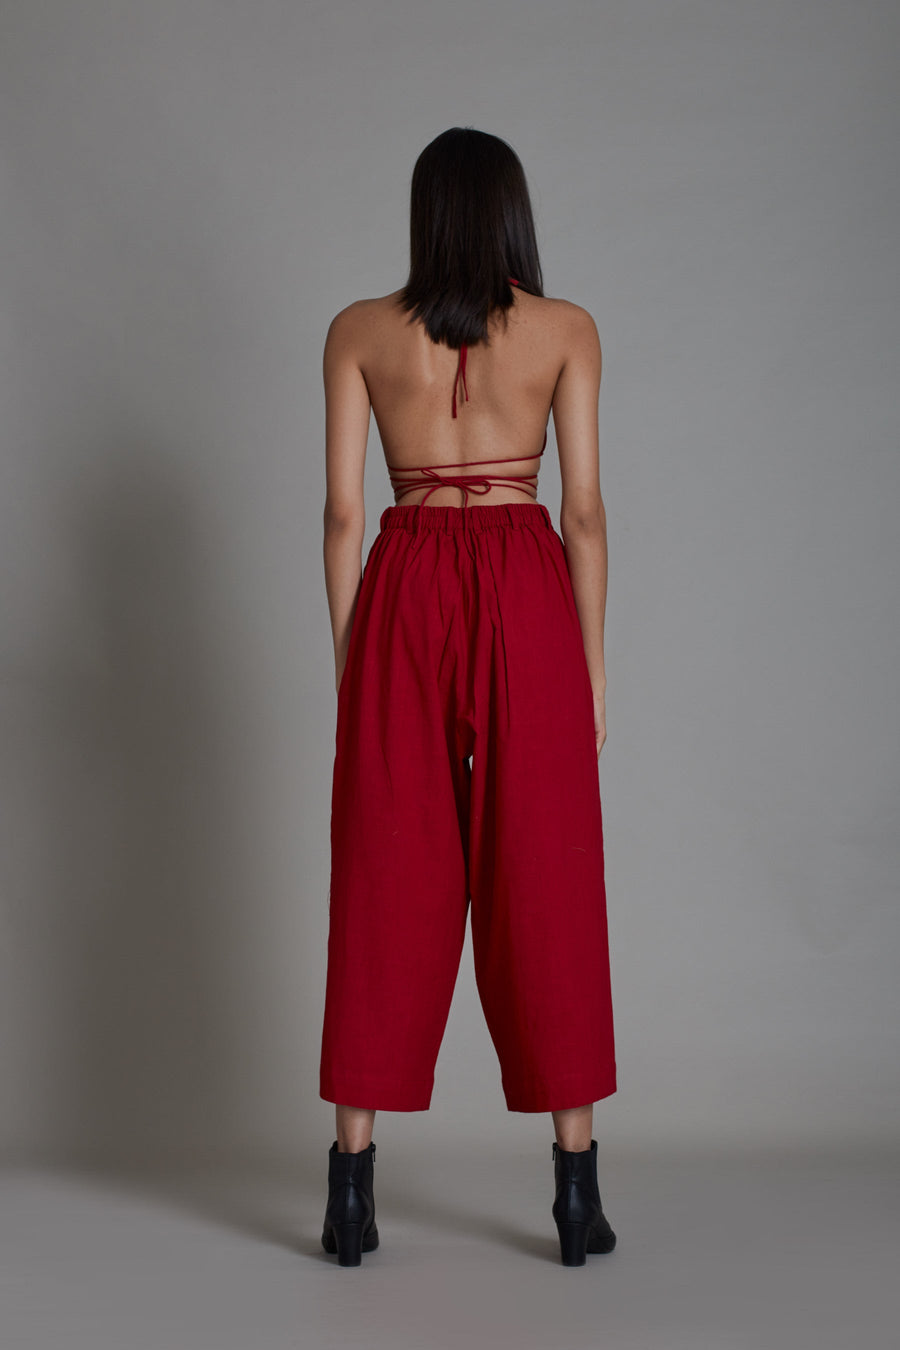 A Model Wearing Red Pure Cotton Solitaire Pants- Red, curated by Only Ethikal